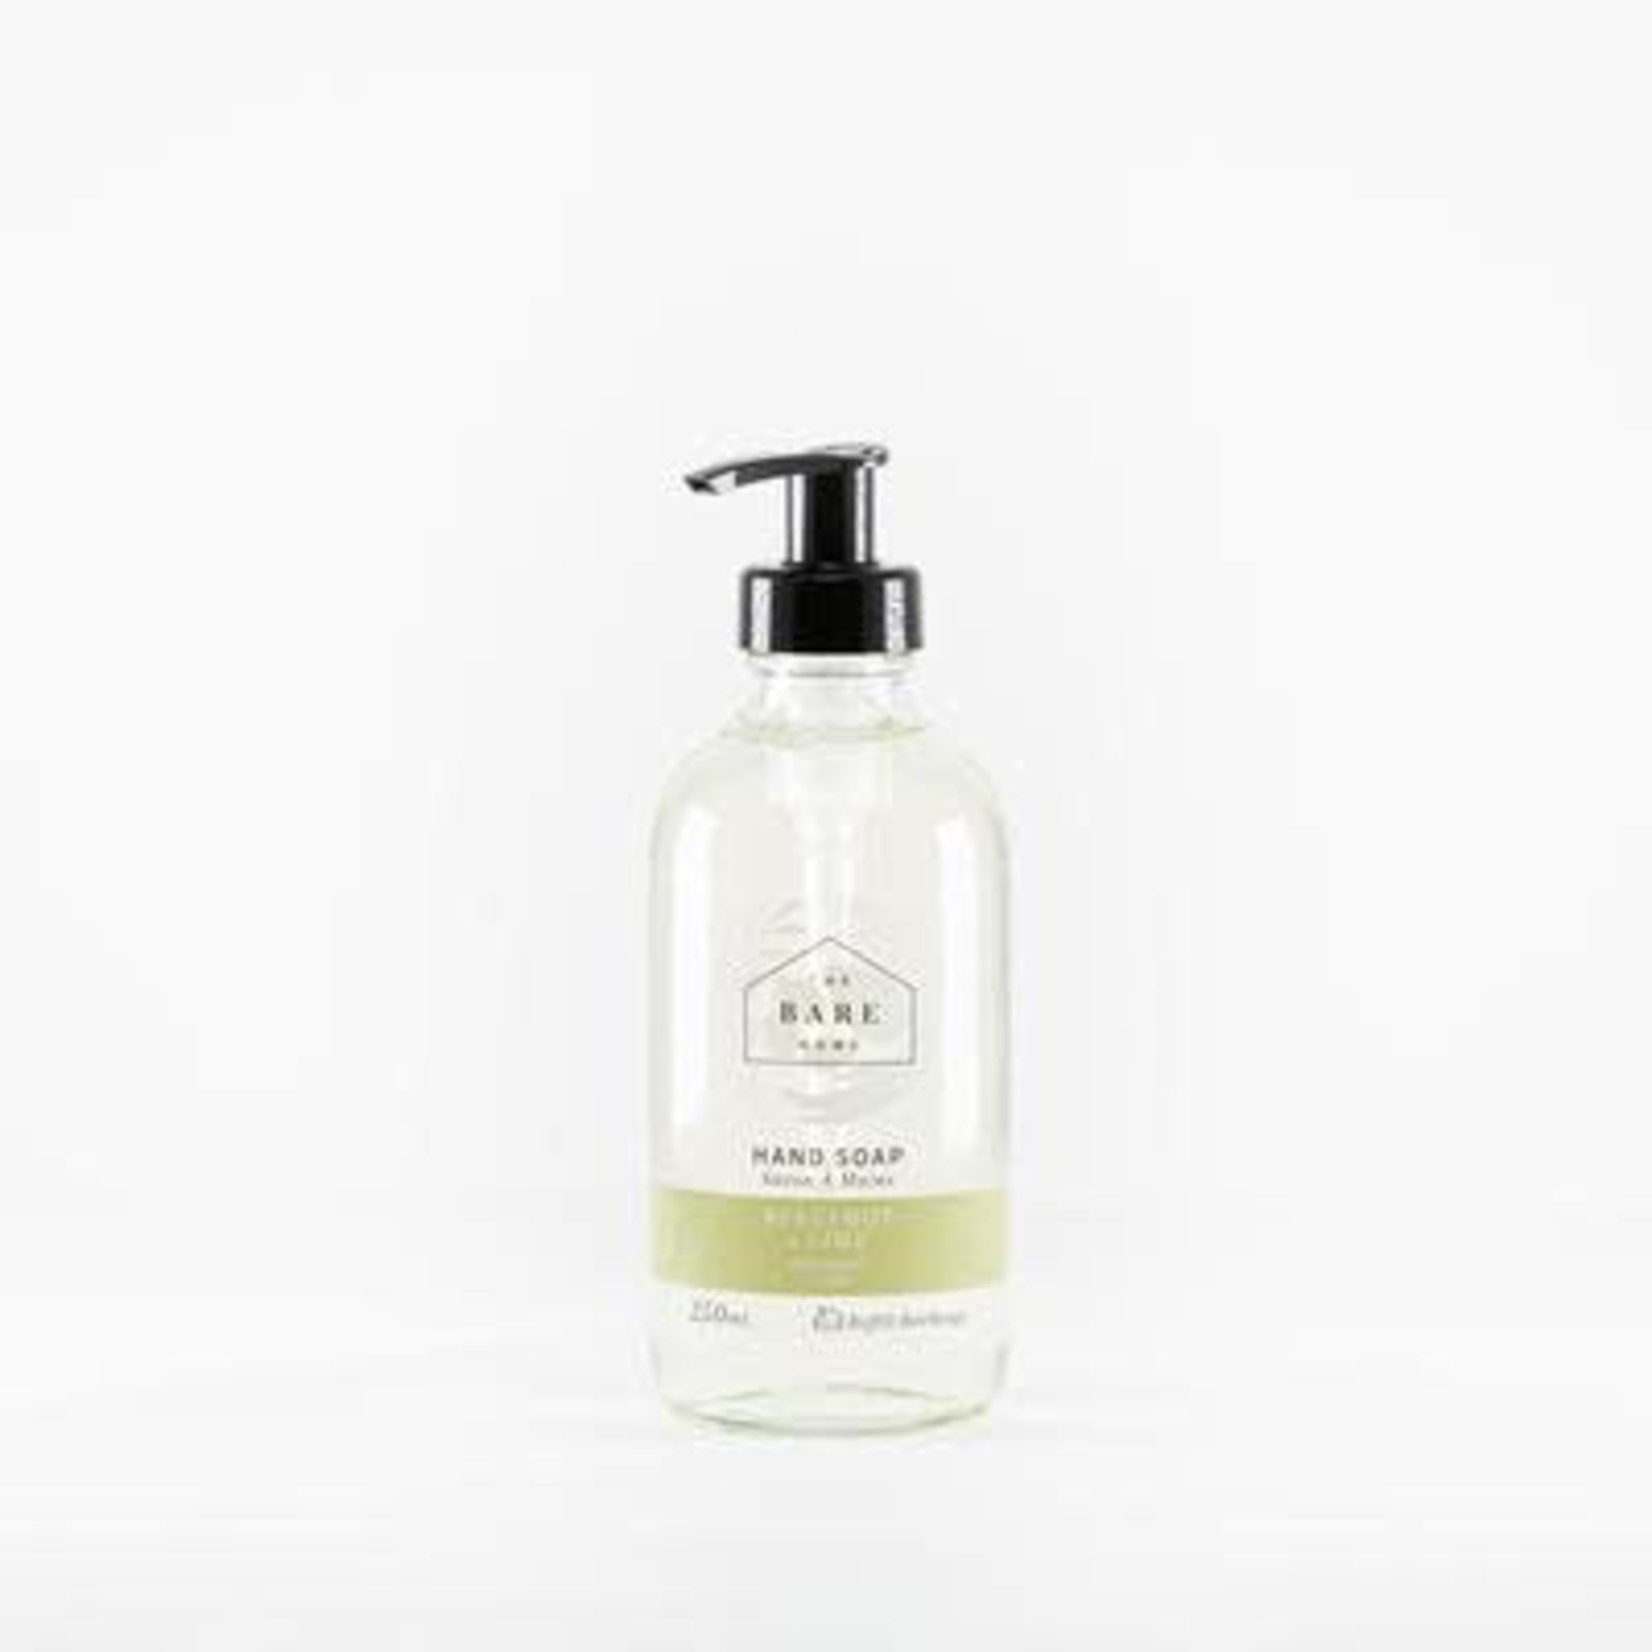 The Bare Home Hand Soap Bergamot and Lime